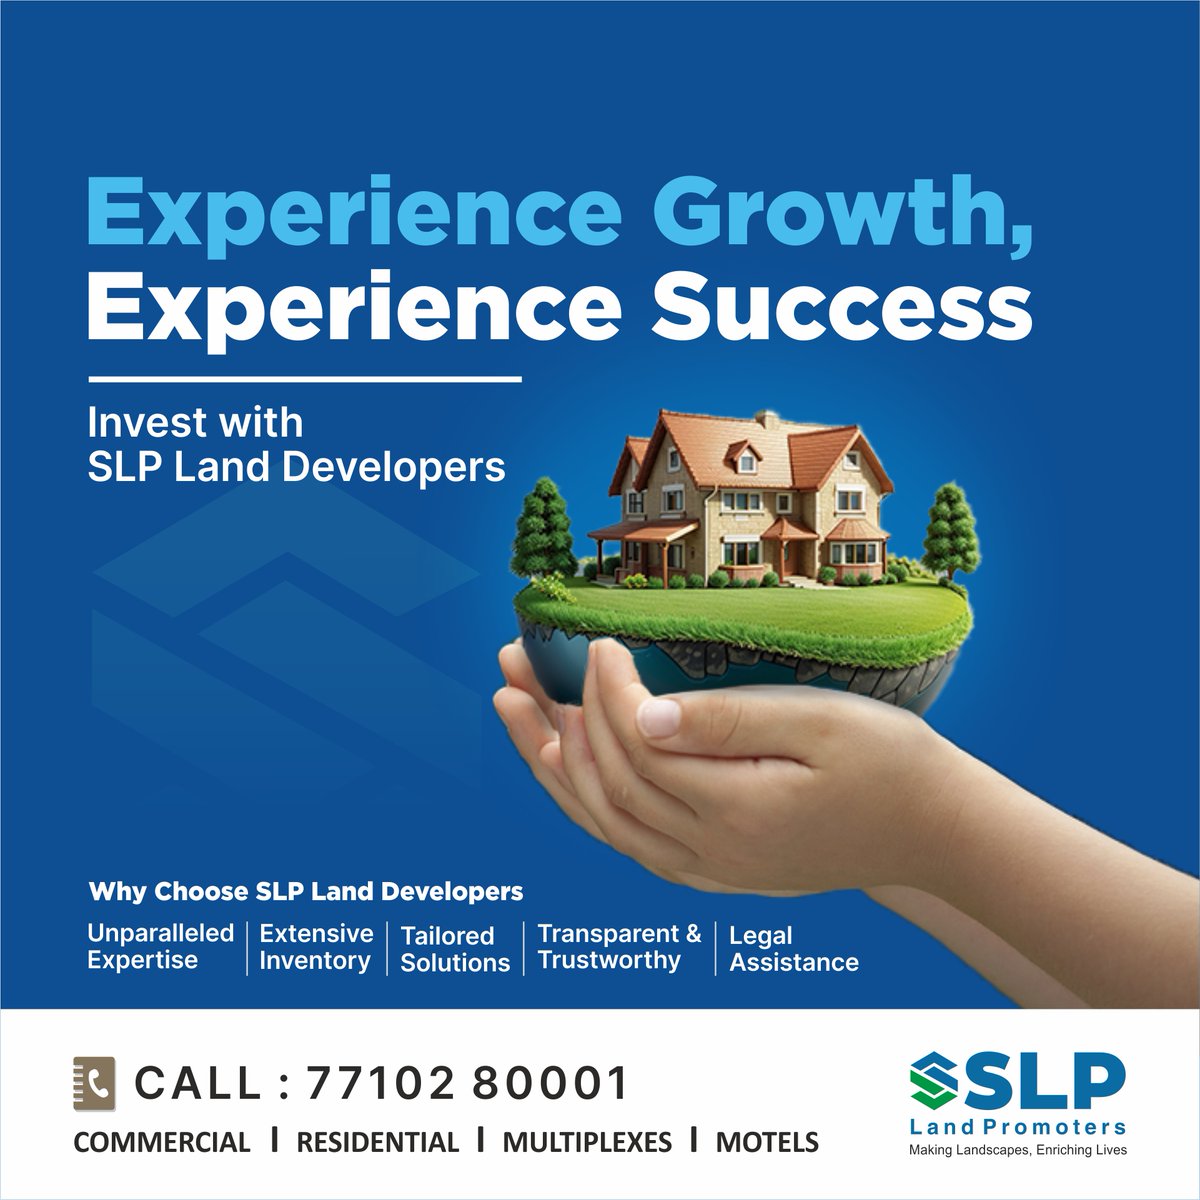 Plant the seeds of success with SLP Land Developers. Our commitment to excellence and innovation ensures that your investments thrive in a competitive market. Don't just invest – experience growth with us!
#SLPLandDevelopers #DreamHome #propertyinvestor #plot #CommercialSpaces